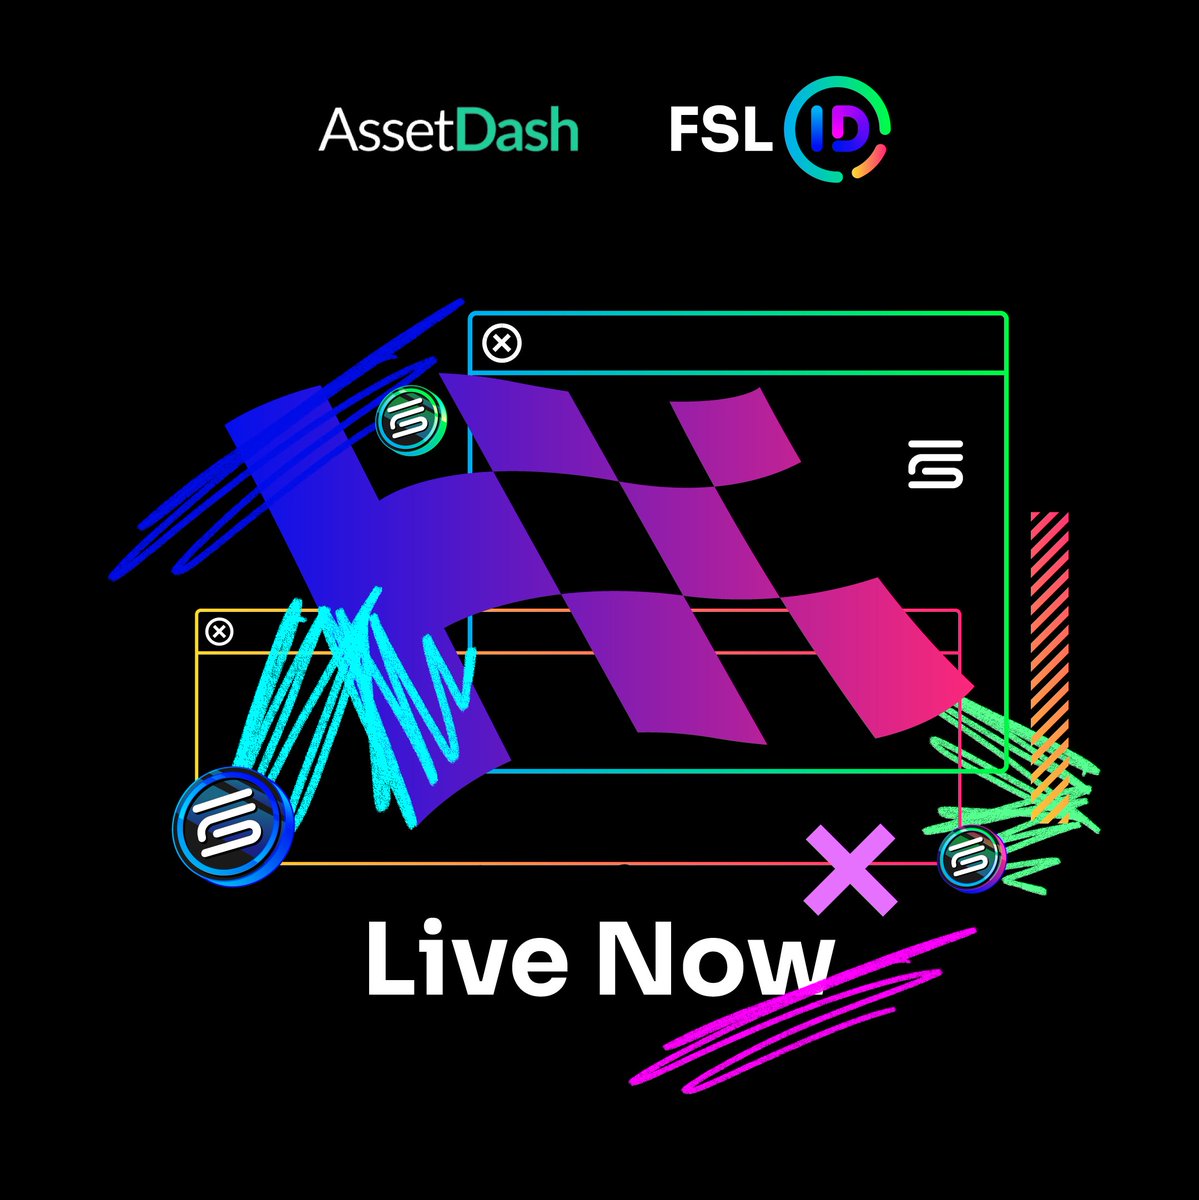 FSL ID Course 🧙‍♂️ Our latest course has launched on @assetdash, all about our newest product: FSL ID! 🌟 🔑 Take the course now to learn about how #FSLID can simplify your #FSL journey with a single login and earn rewards in #STEPN, #MOOAR, and #GasHero. 🎟️ Earn Asset Dash…